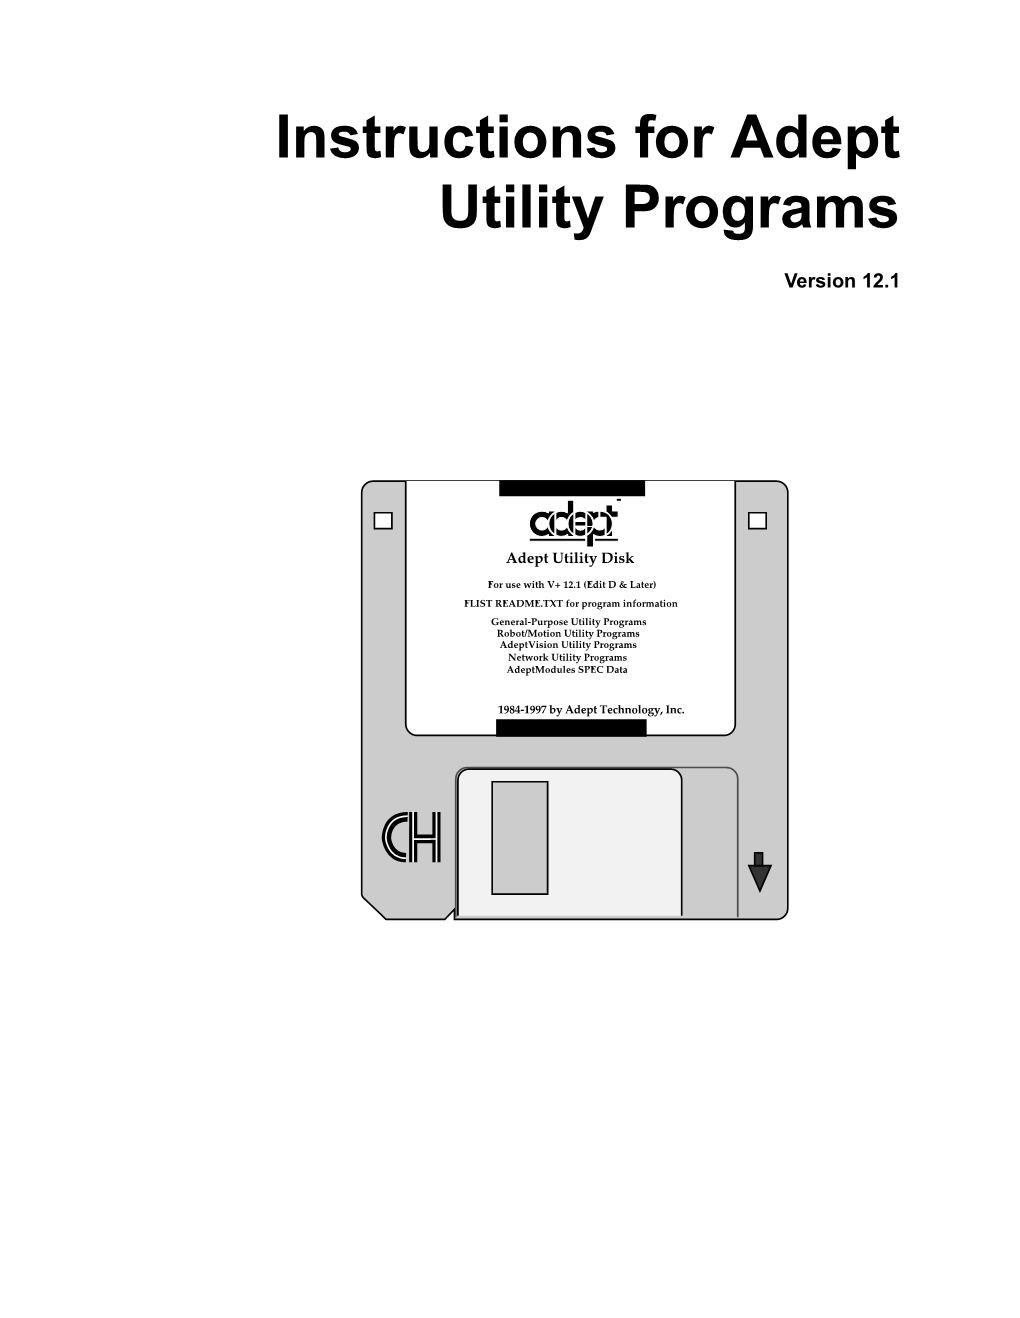 Instructions for Adept Utility Programs